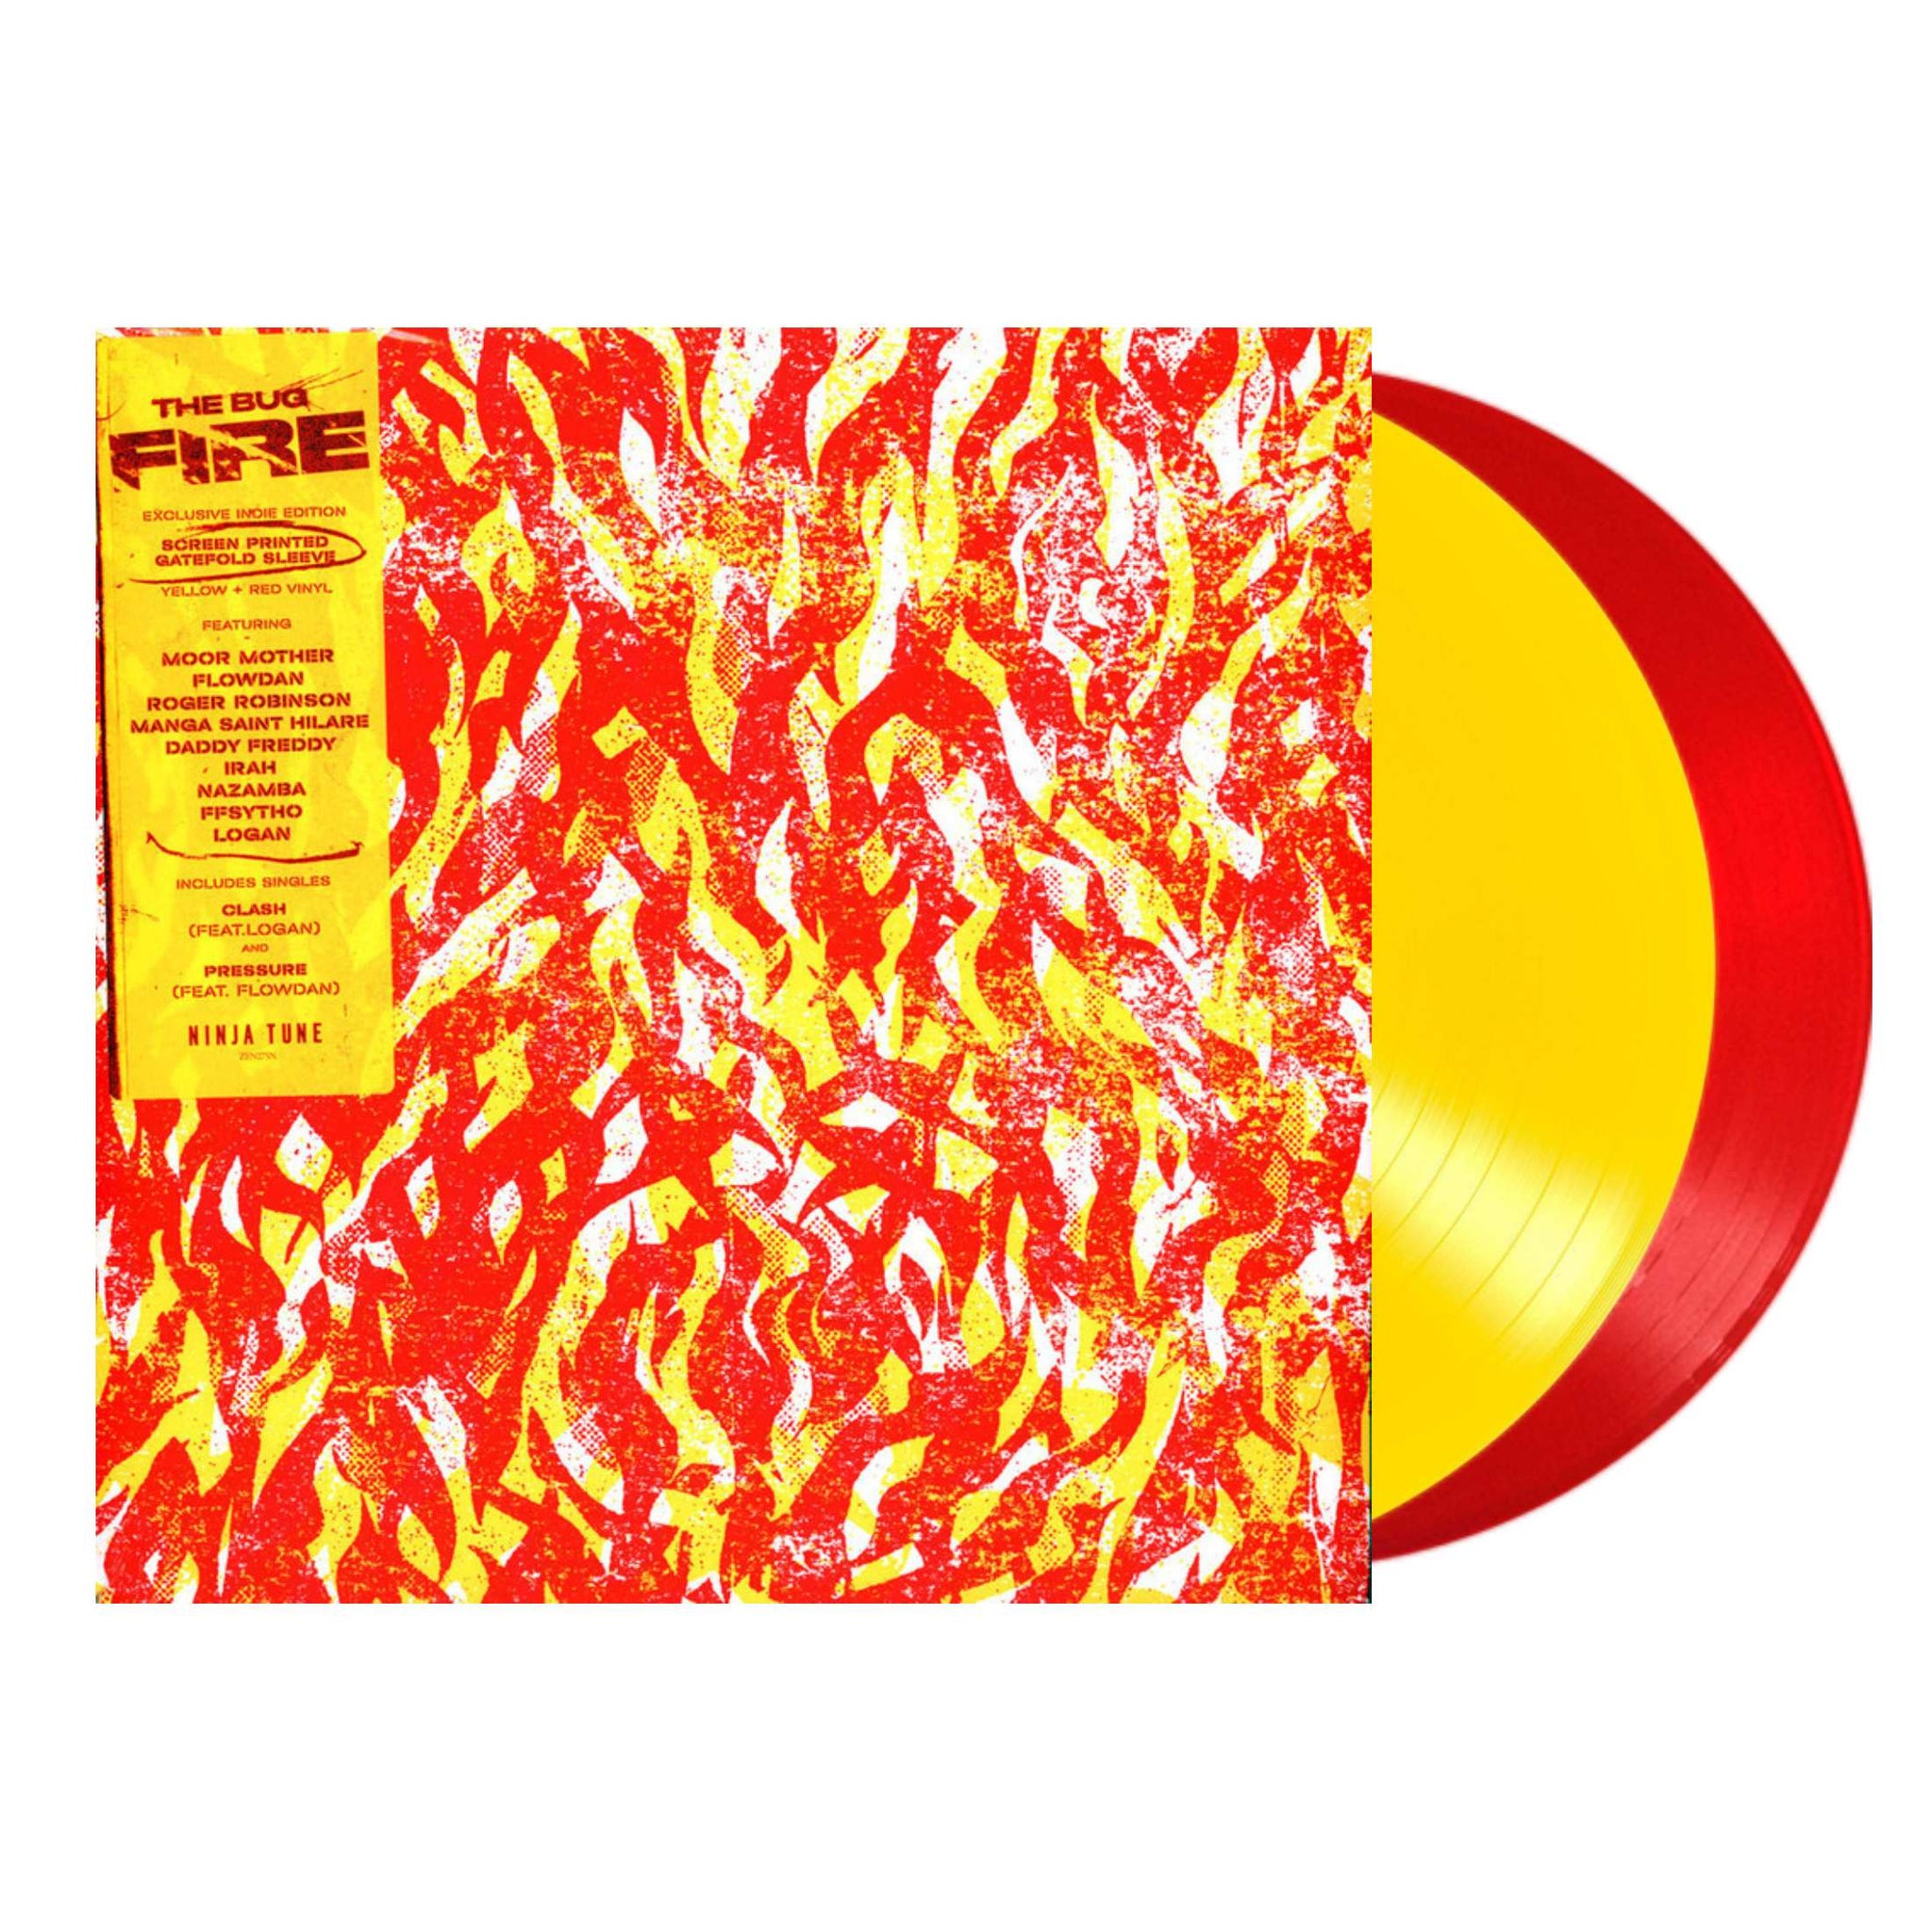 The Bug - Fire 2xLP (Red and Yellow Opaque Vinyl)